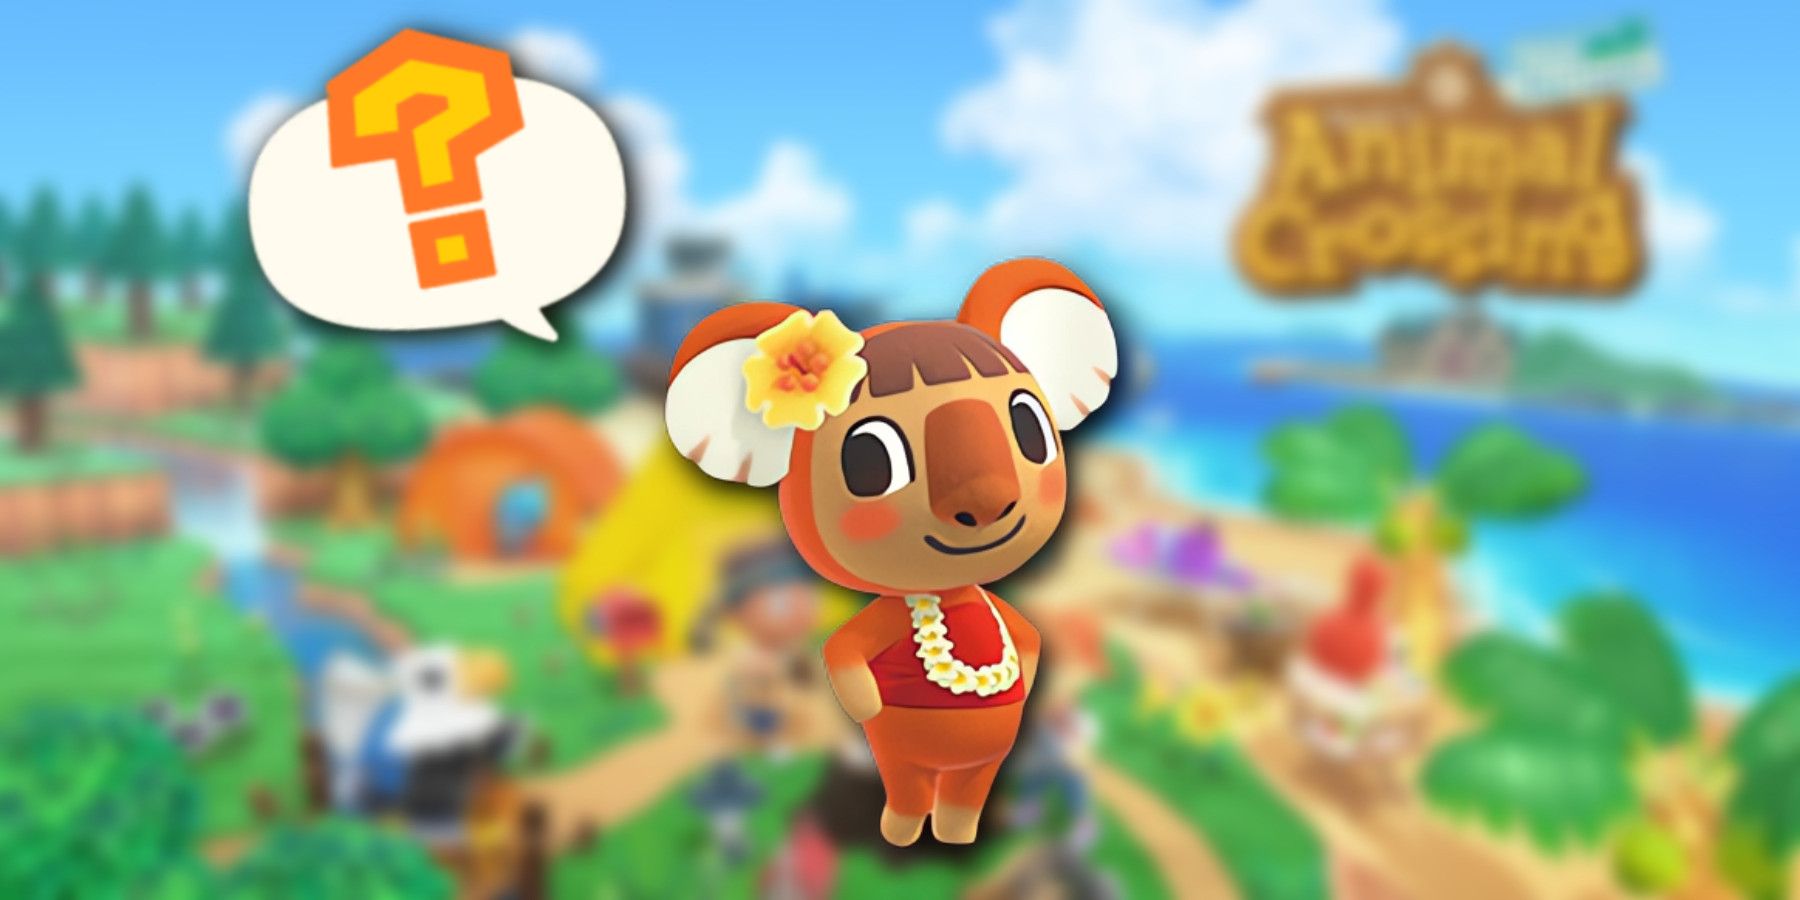 blurred animal crossing new horizons key art with faith koala and question mark on top